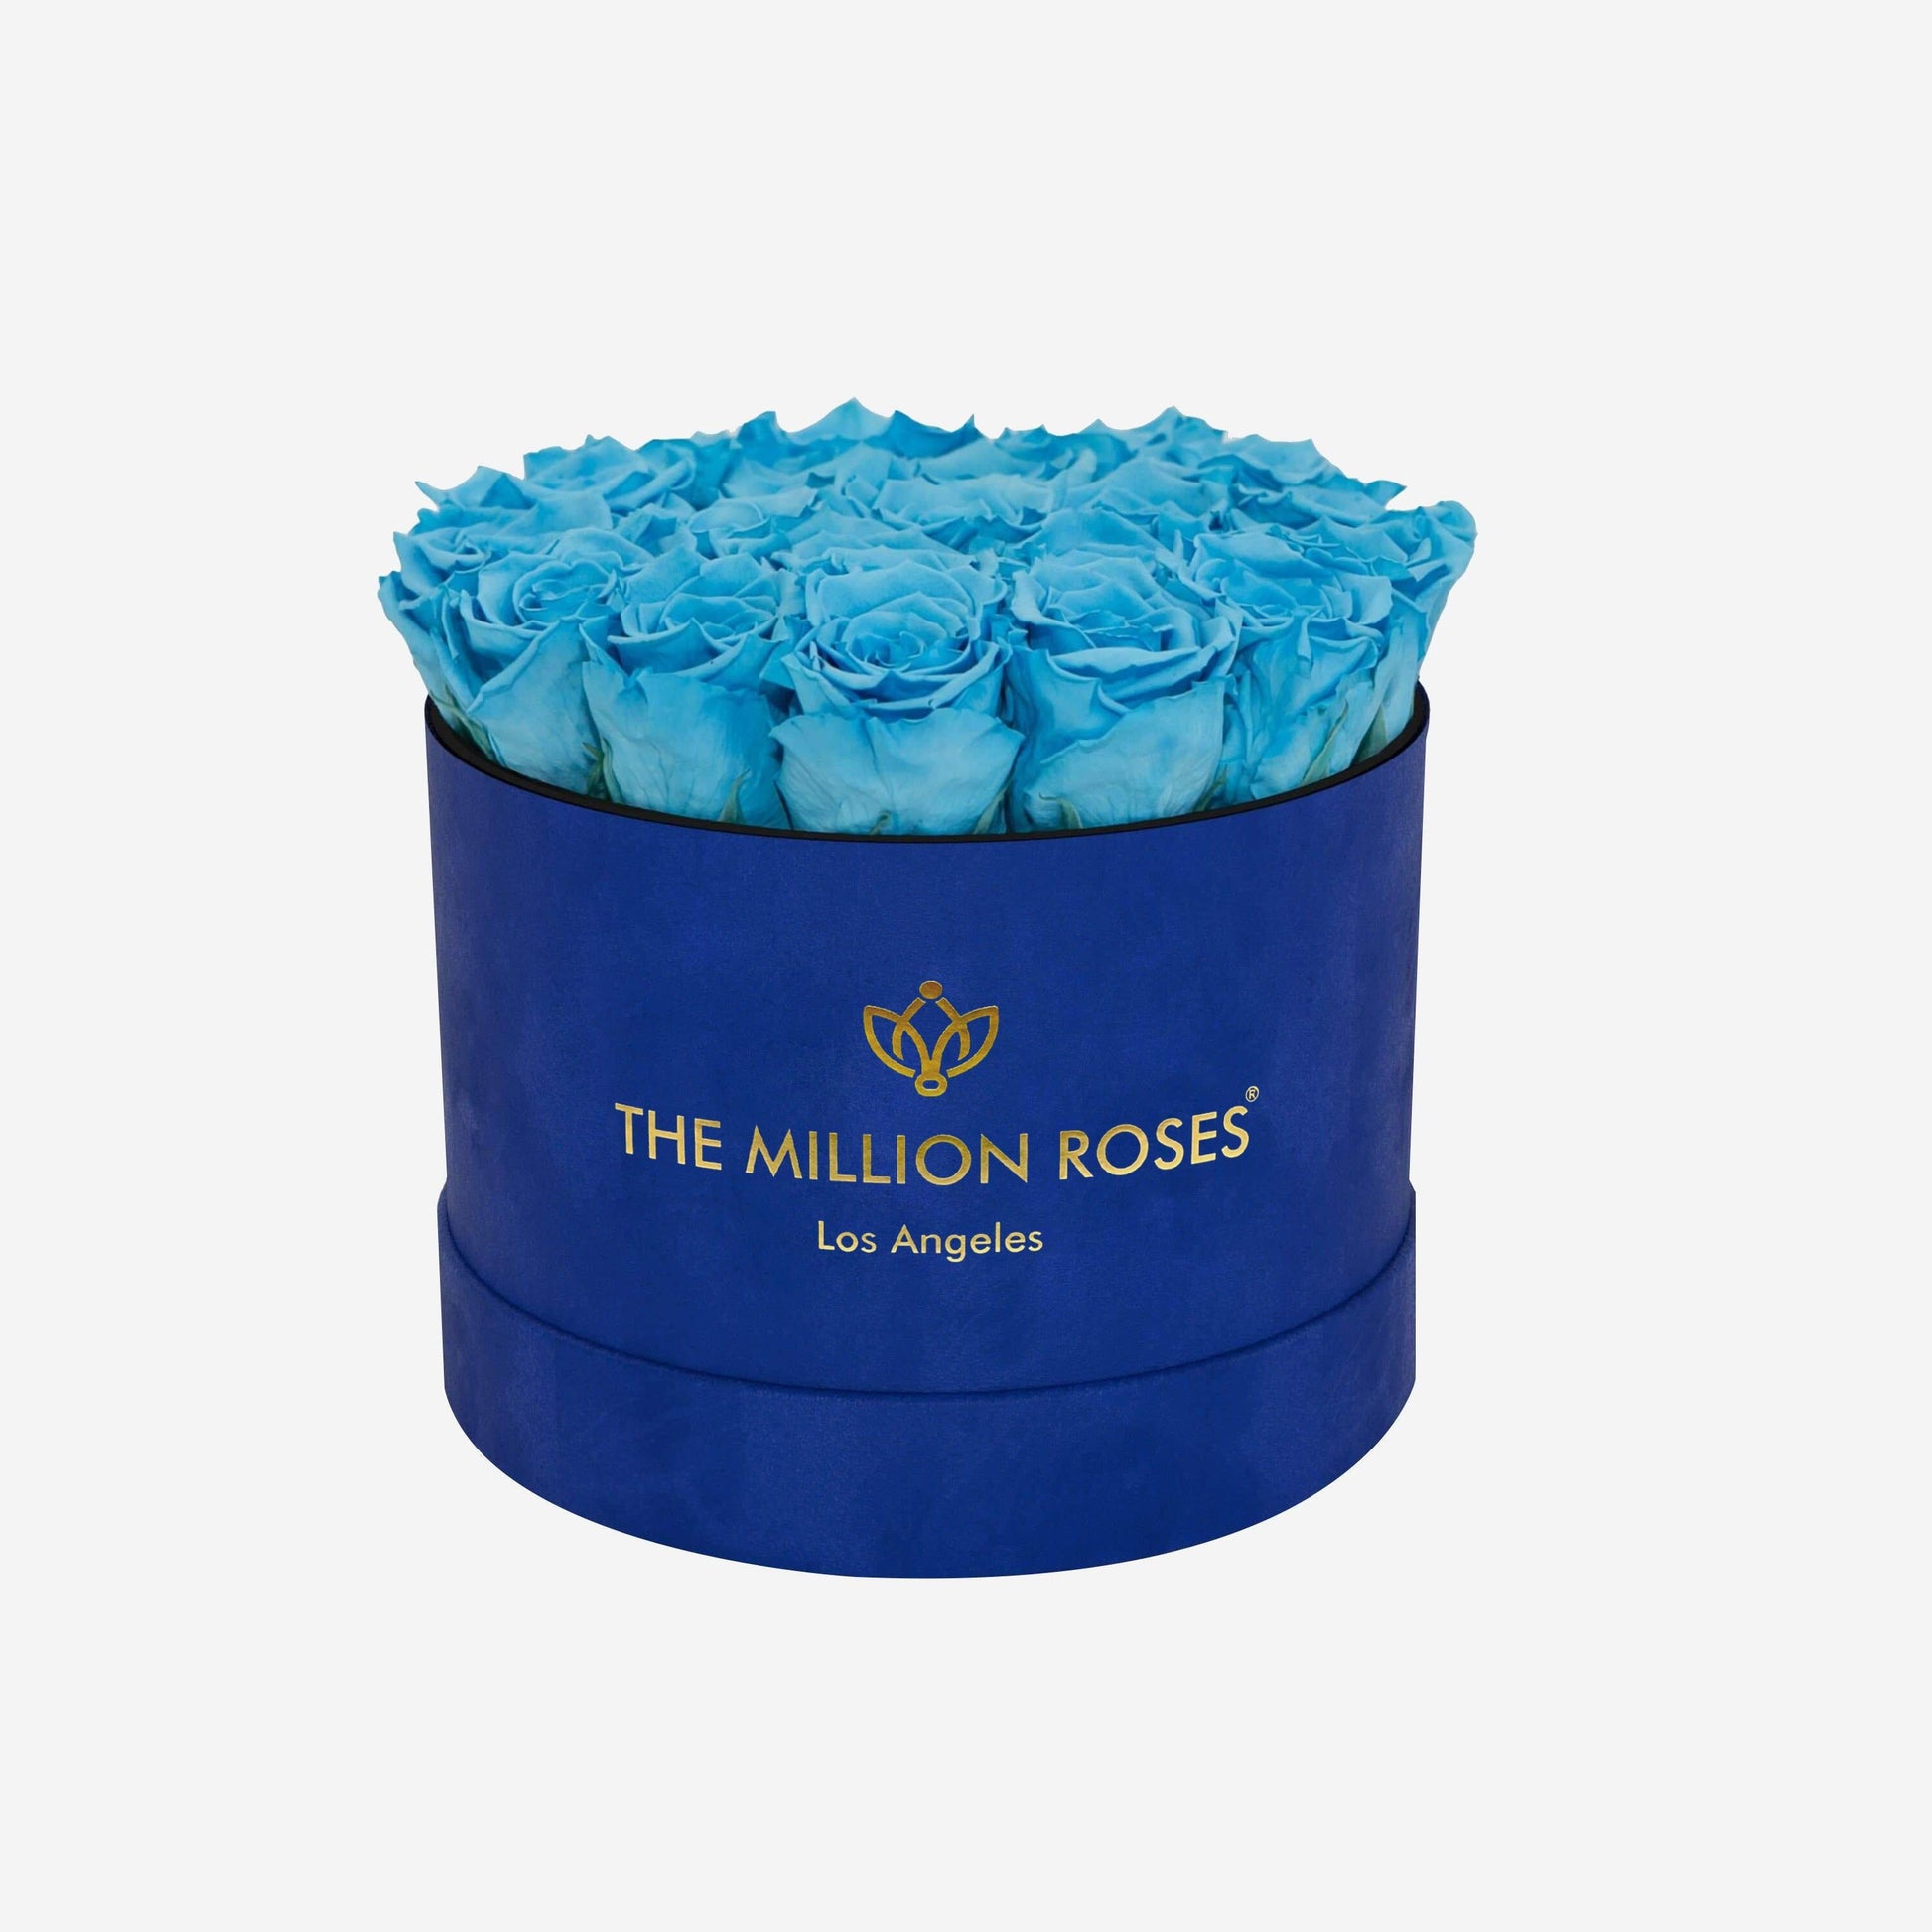 Classic Royal Blue Suede Box | Light Blue Roses - The Million Roses